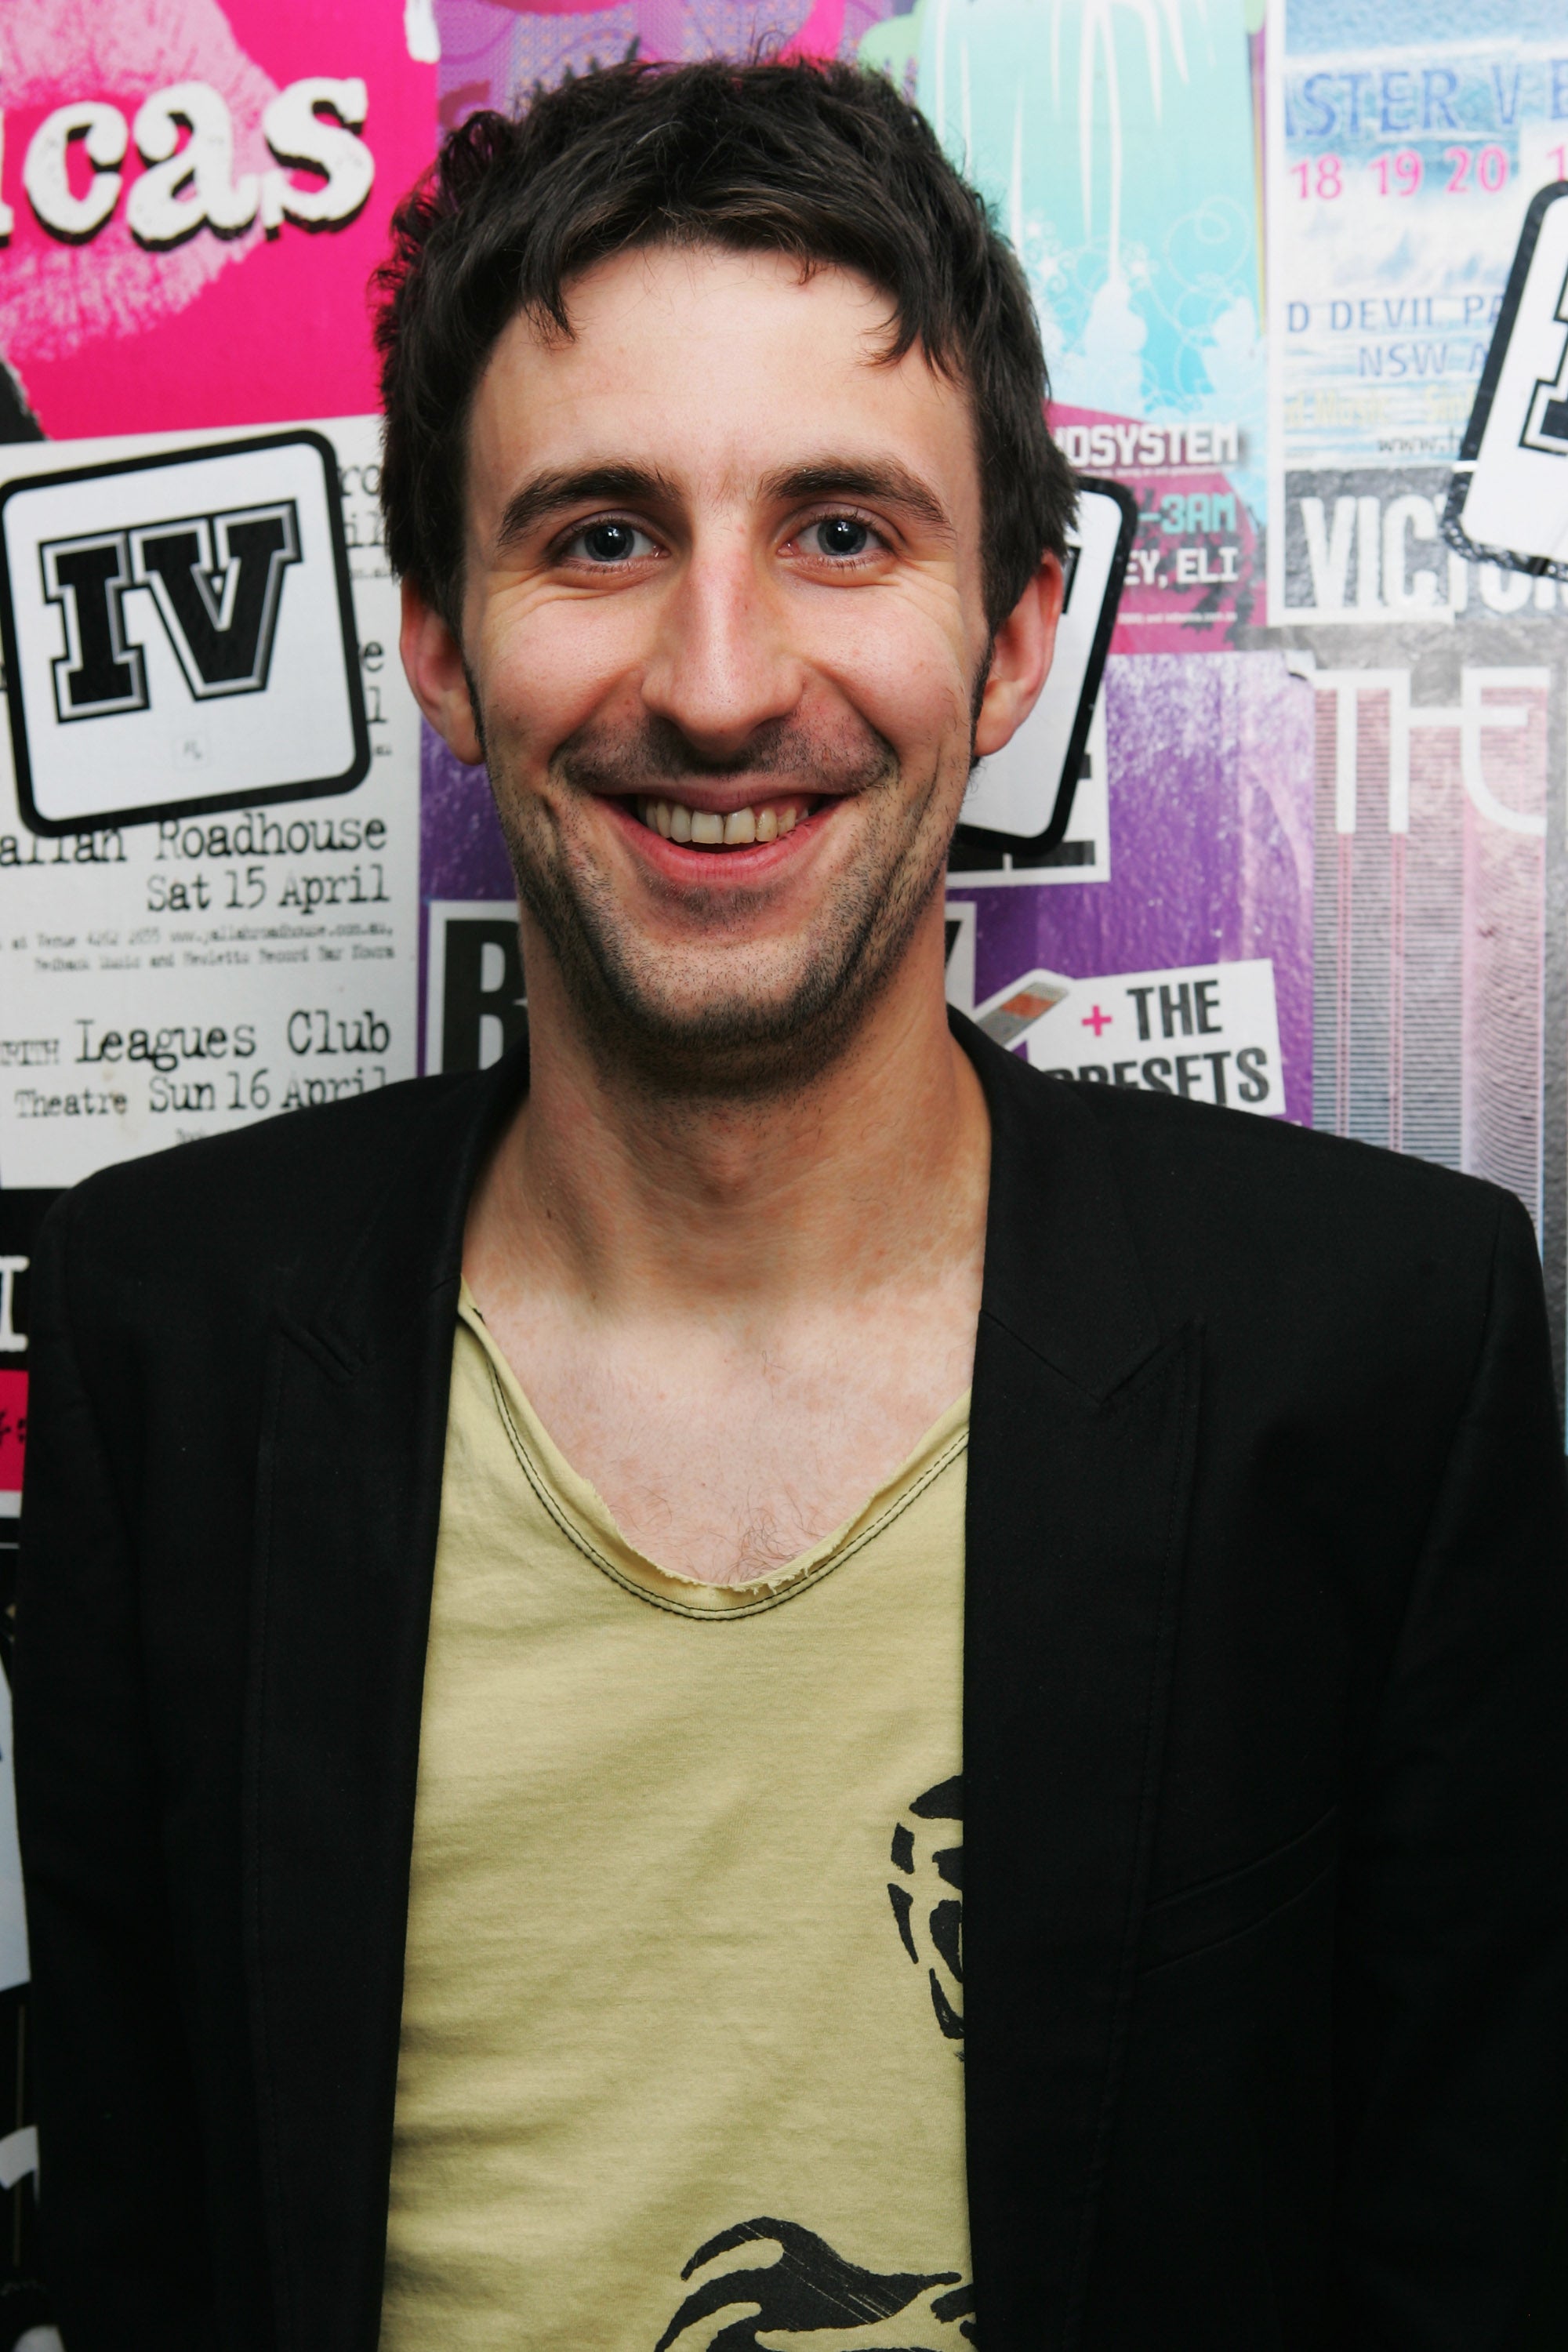 Mark Watson attends the opening night of the Cracker Comedy Festival at the Metro Theatre on April 16, 2008